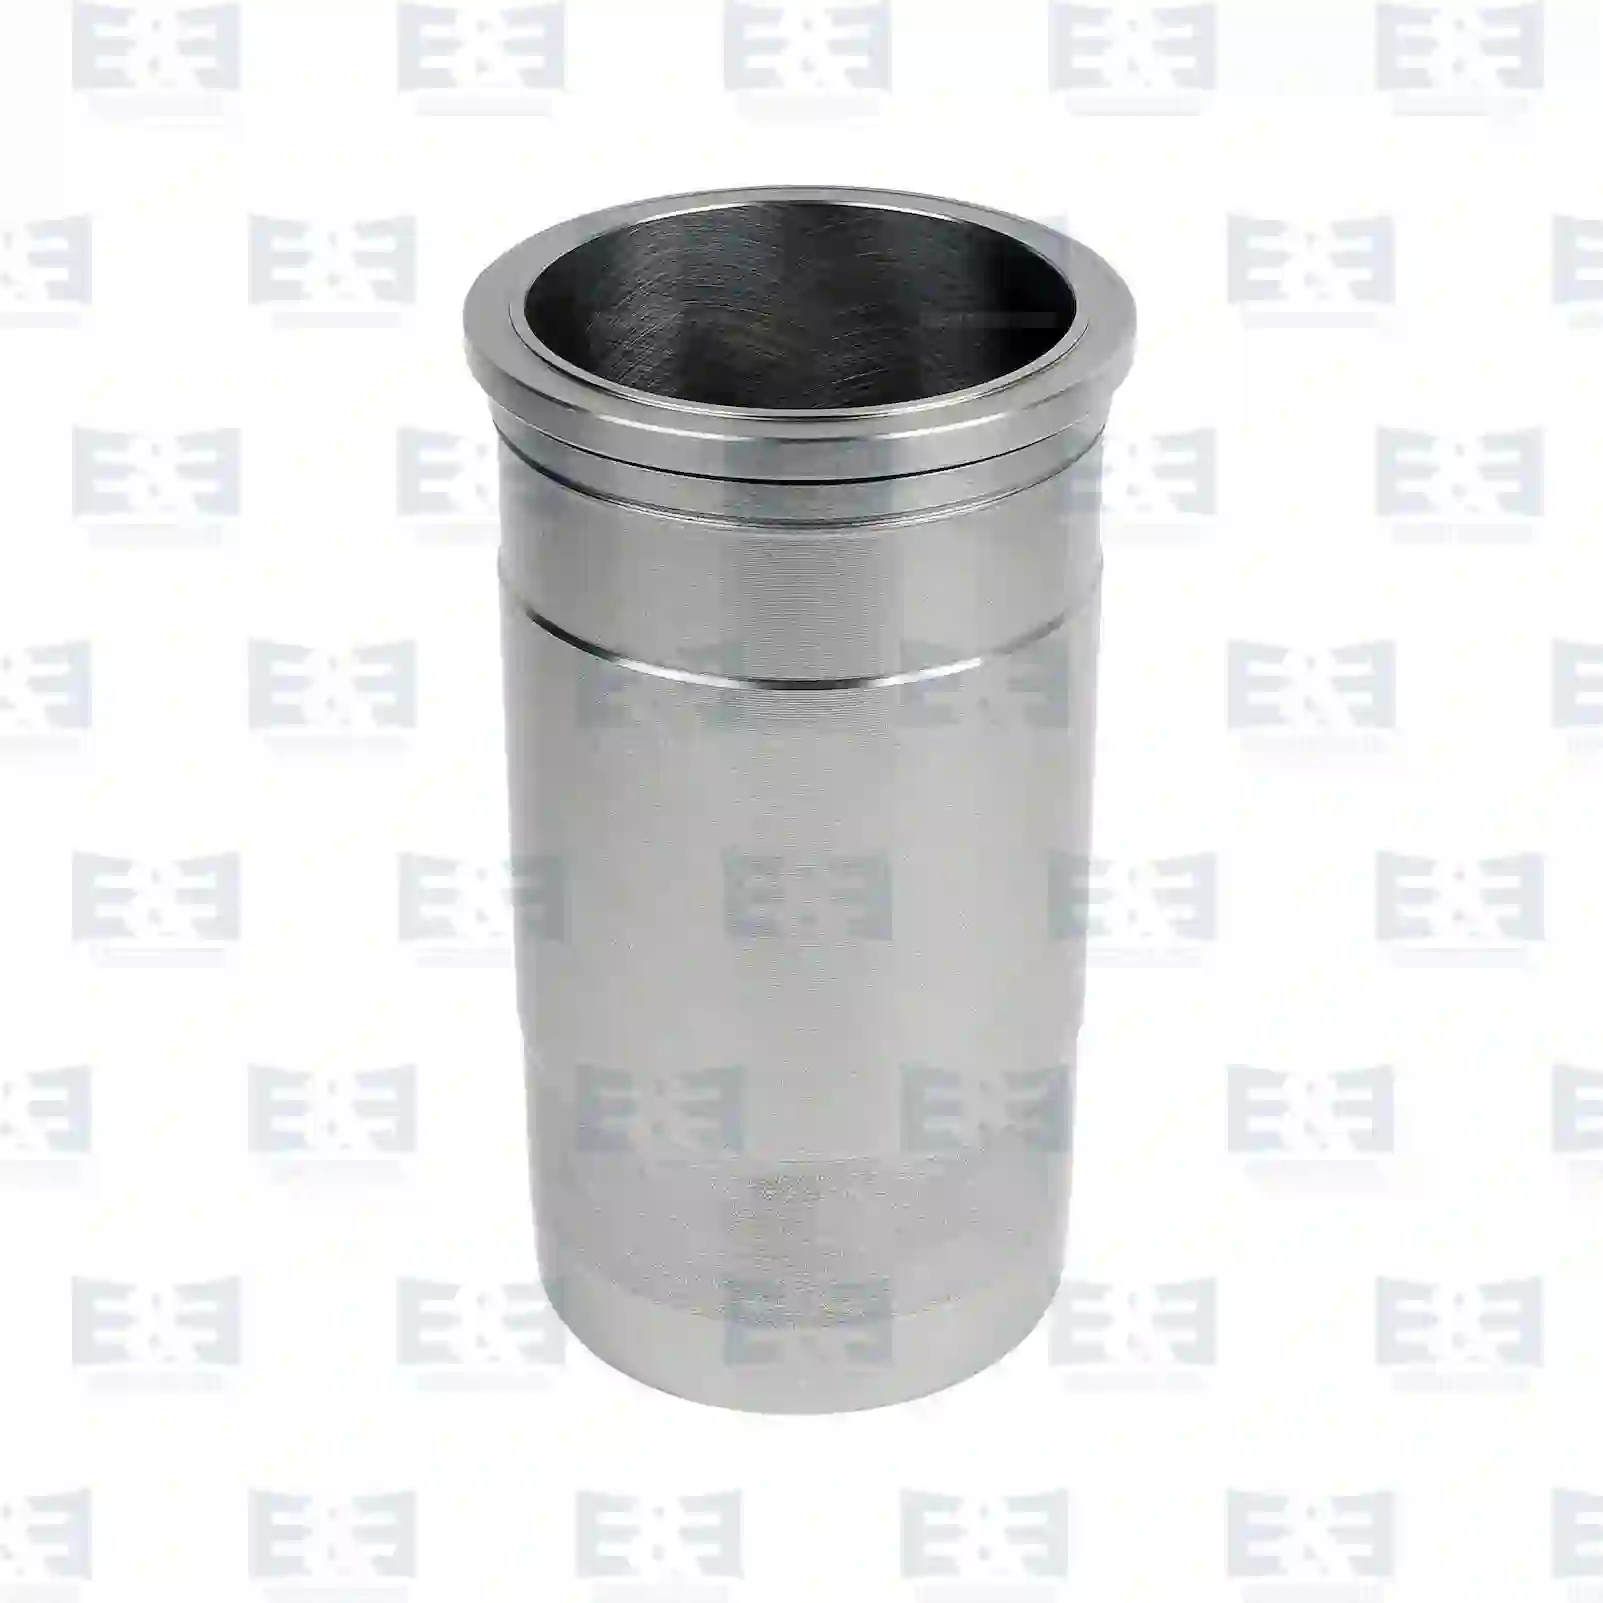 Cylinder liner, without seal rings, 2E2208386, 5010240947, 5010240948, 7421105707, ||  2E2208386 E&E Truck Spare Parts | Truck Spare Parts, Auotomotive Spare Parts Cylinder liner, without seal rings, 2E2208386, 5010240947, 5010240948, 7421105707, ||  2E2208386 E&E Truck Spare Parts | Truck Spare Parts, Auotomotive Spare Parts